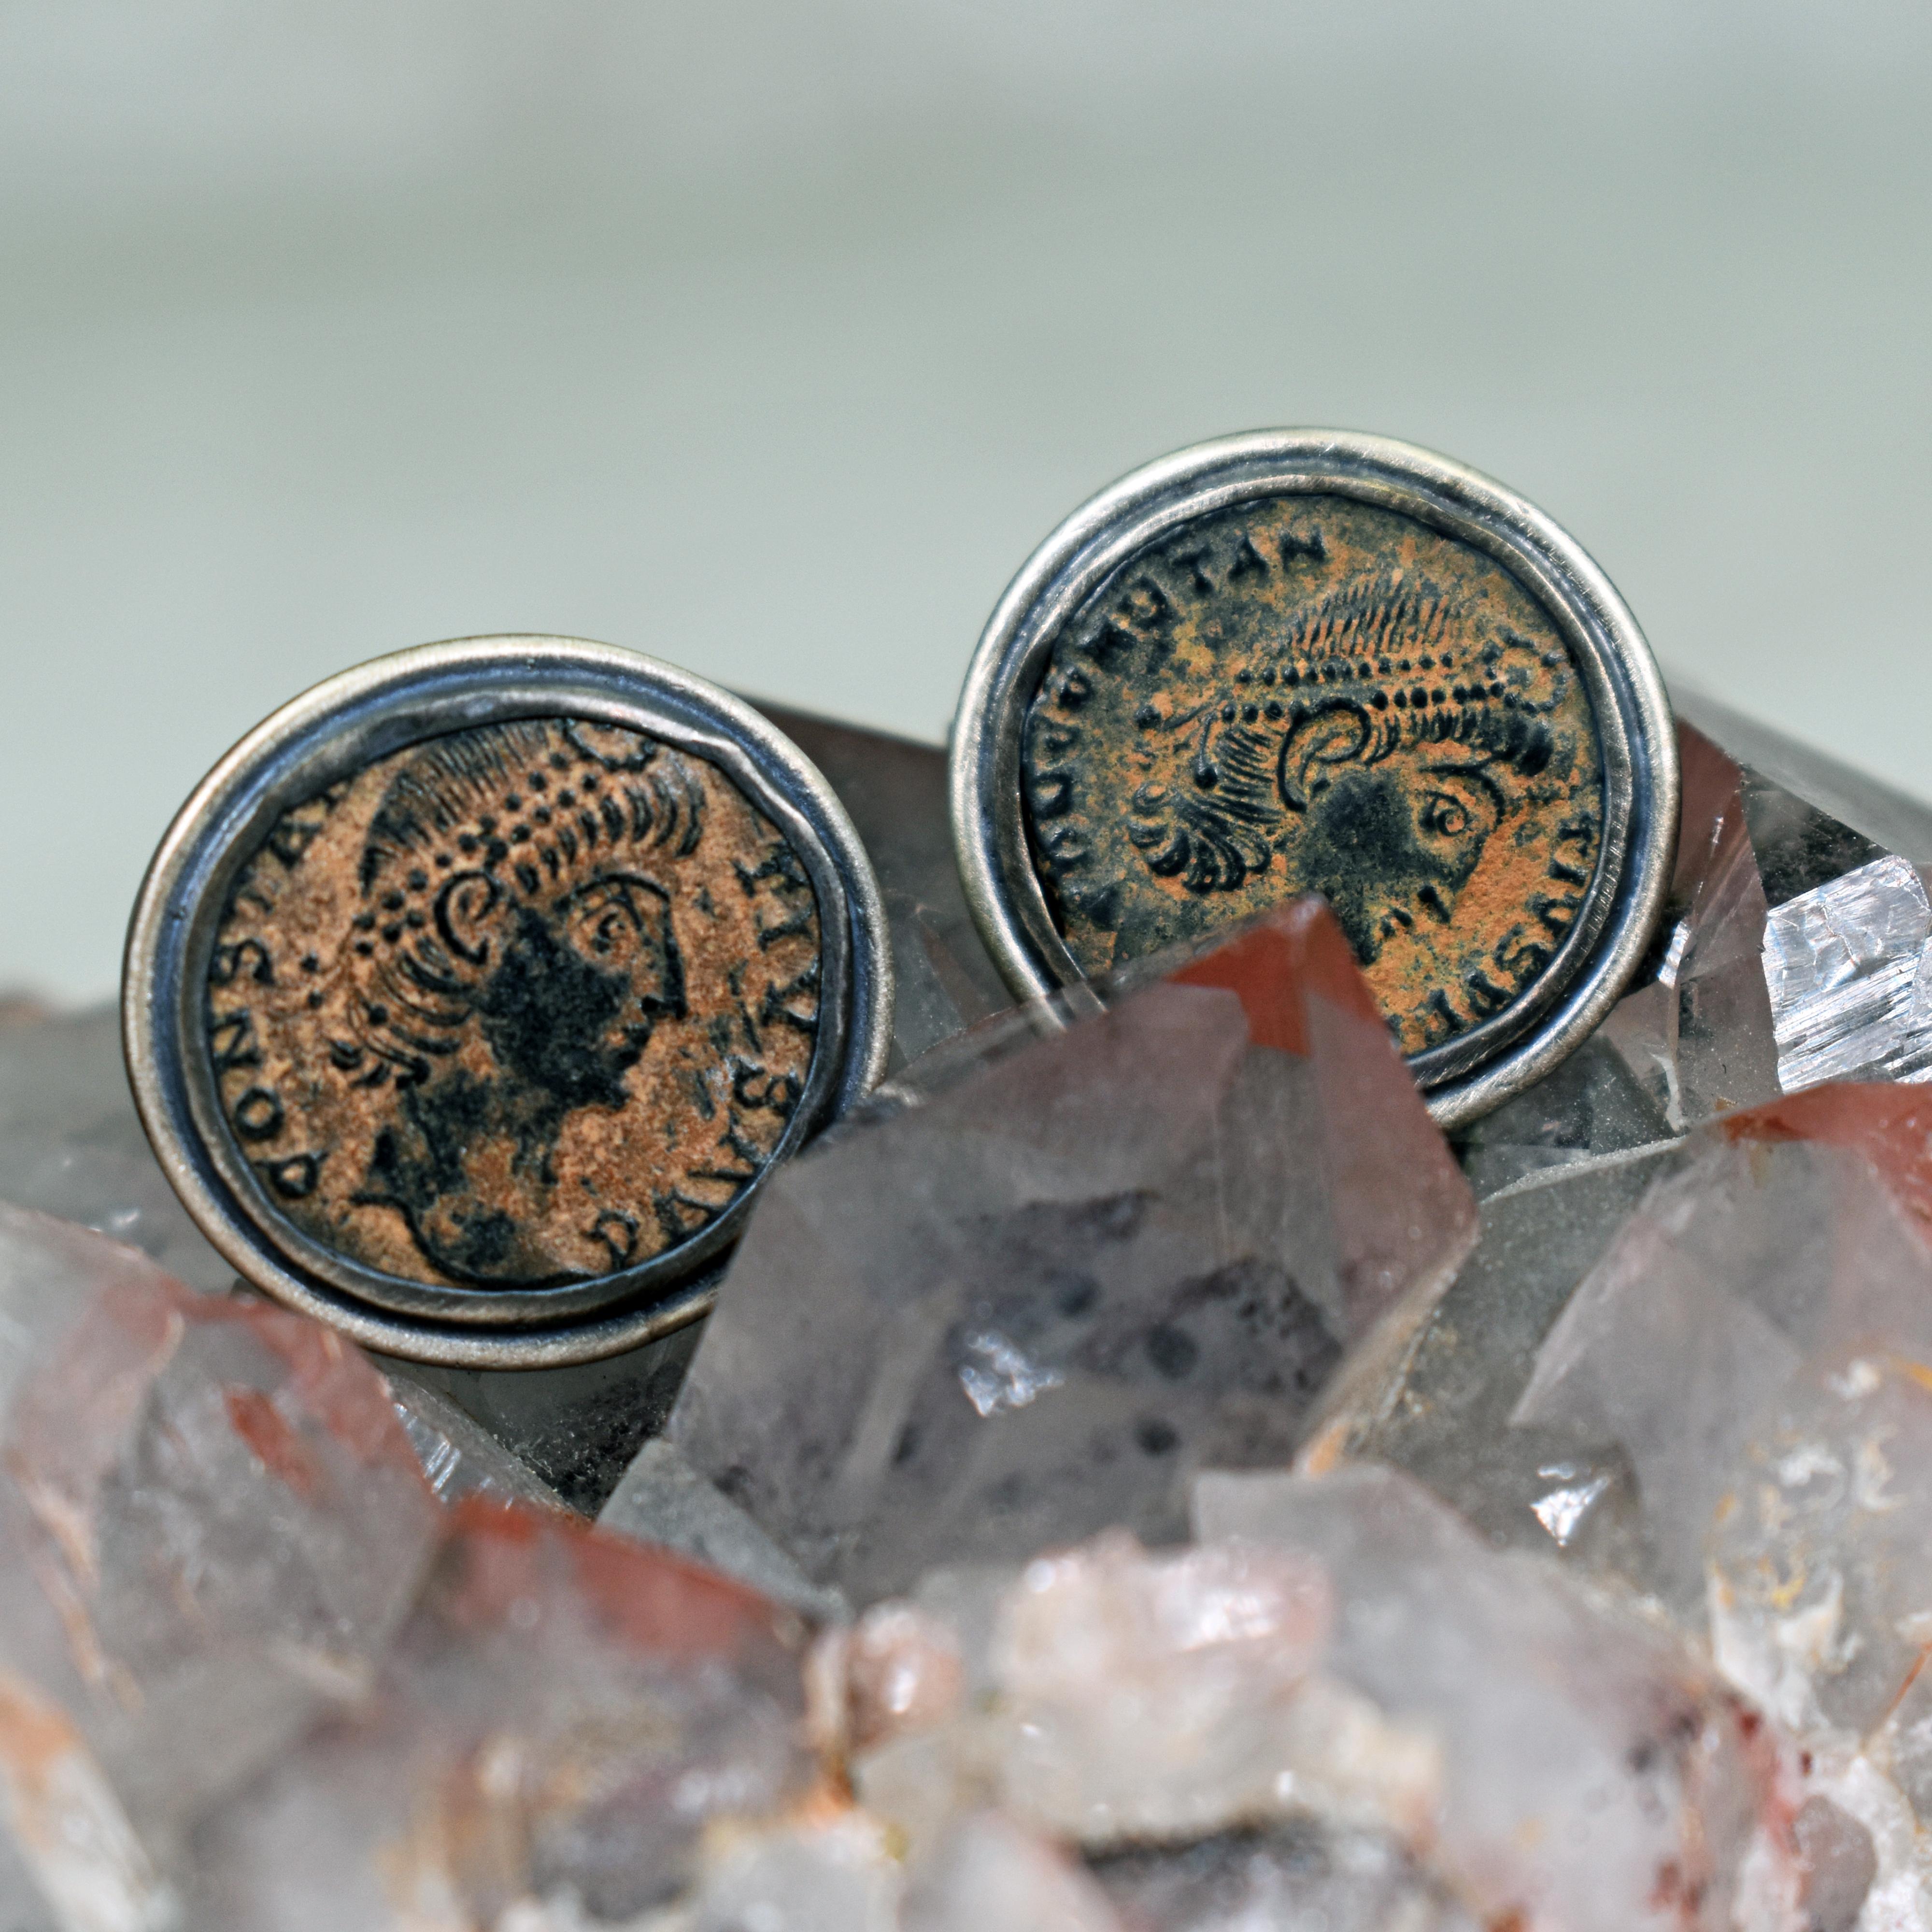 Authentic ancient Roman bronze coins set in oxidized sterling silver cuff links and finished with a brushed texture. Cuff links are approximately 0.63 inches in diameter. Stamped 925.